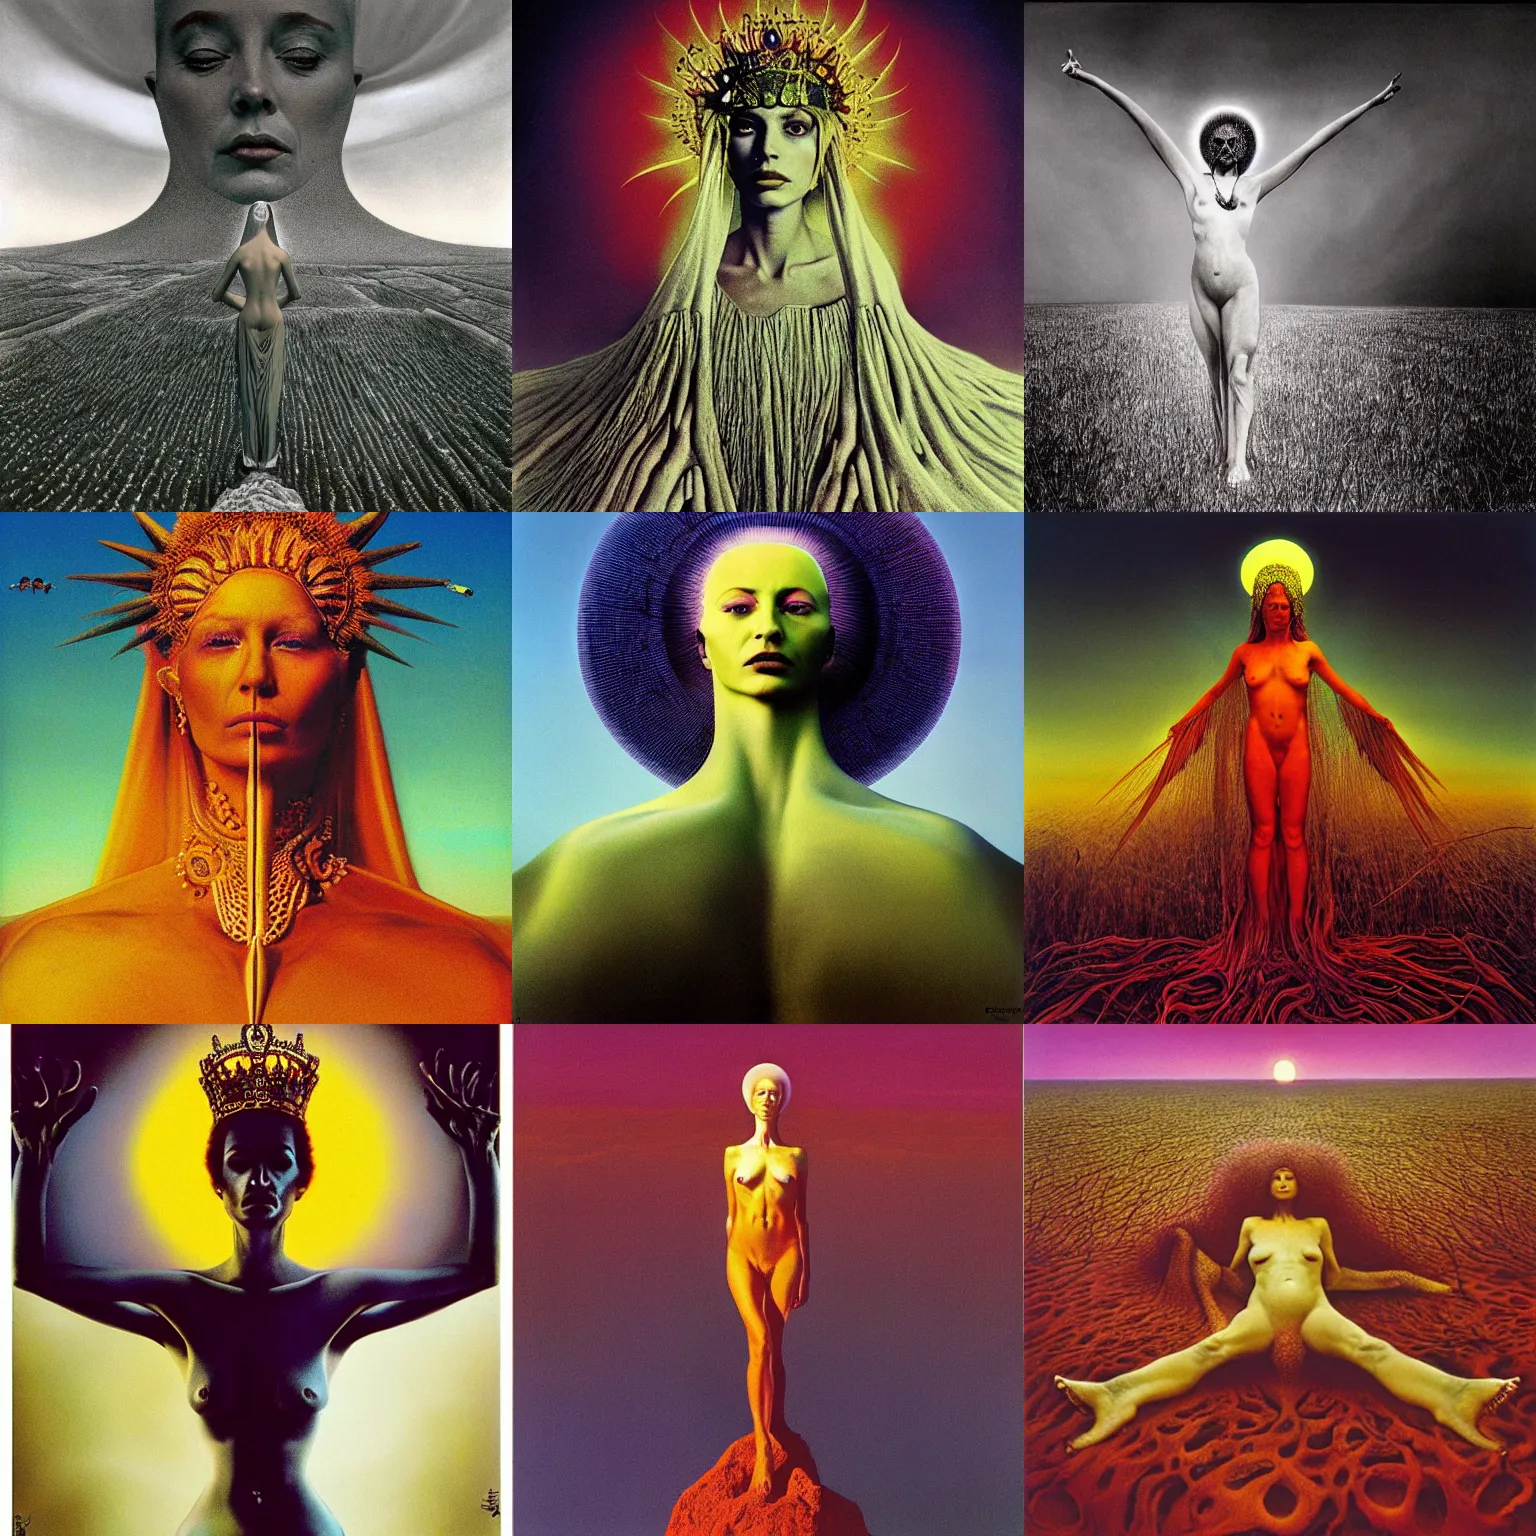 Prompt: the queen of the sun by zdzisław beksiński, photoshoot by david lachapelle